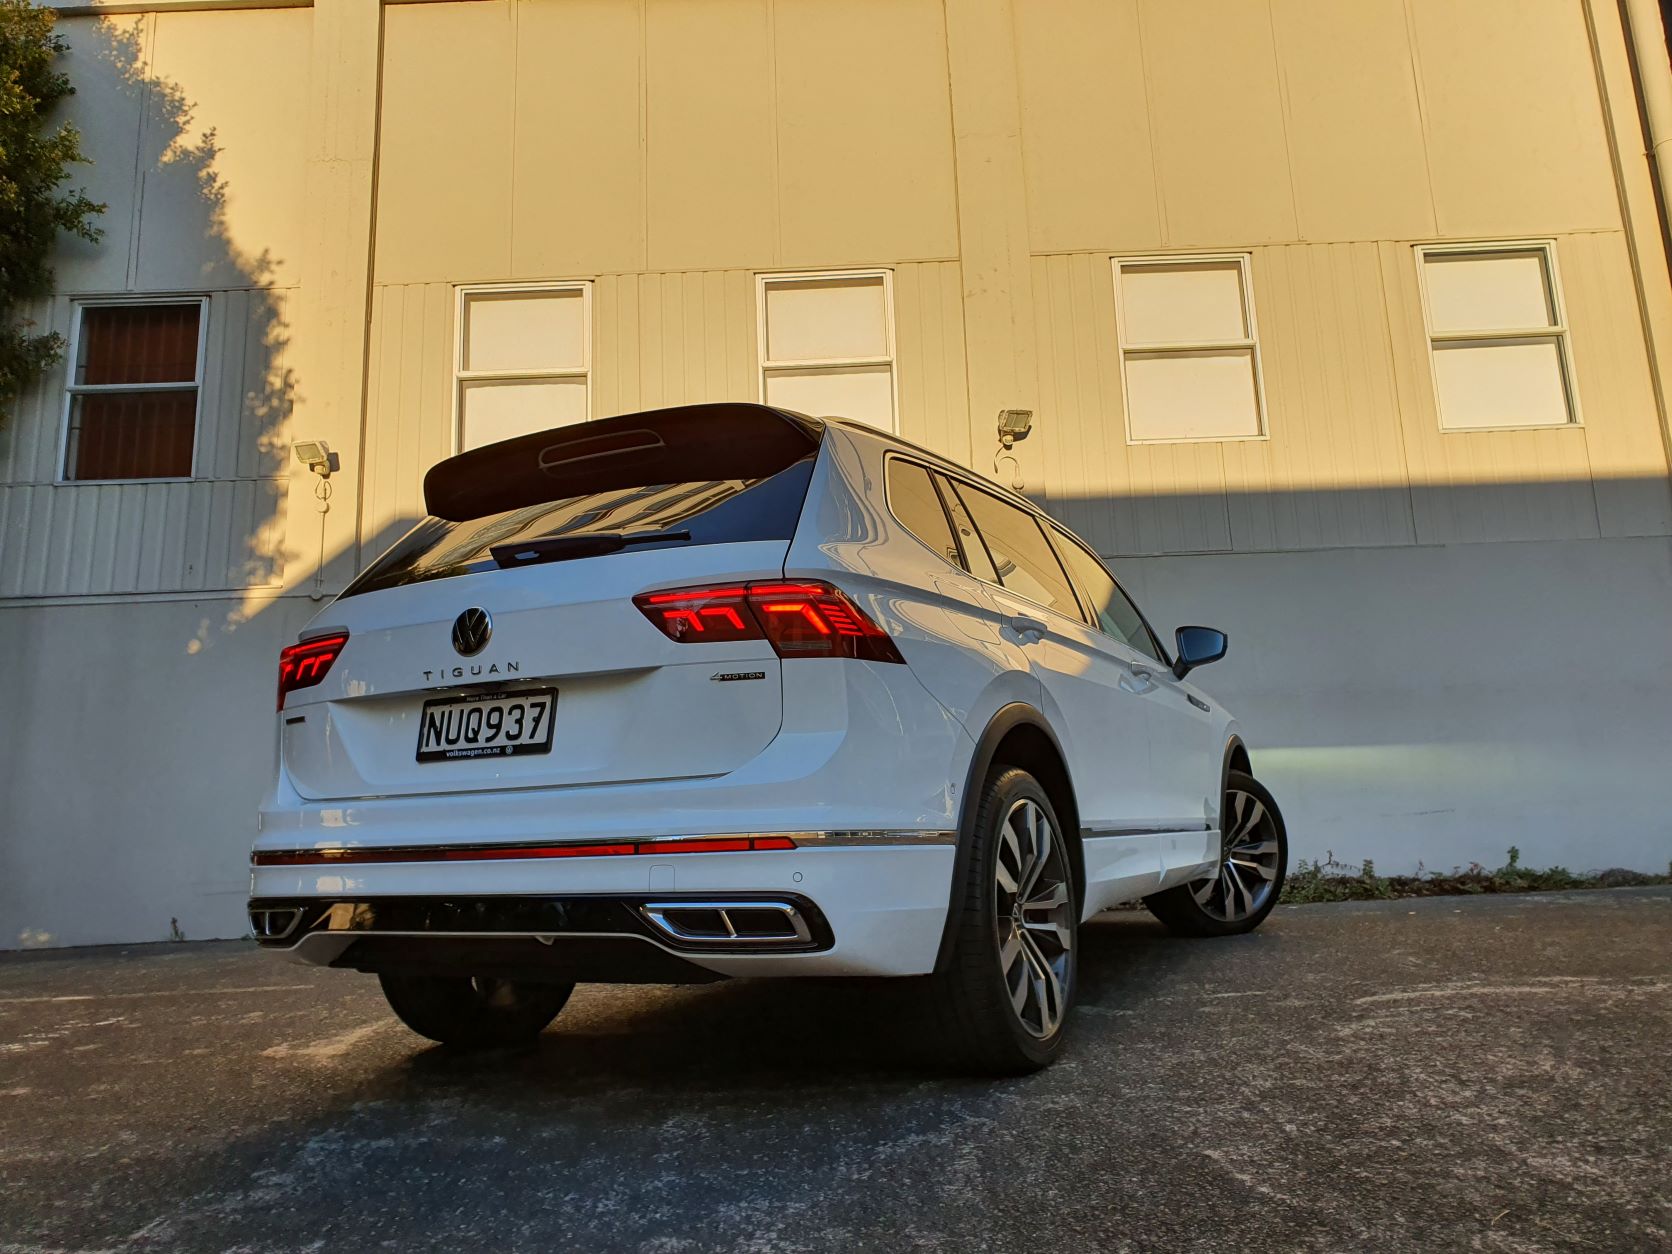 Rear three quarters view of the Volkswagen Tiguan Allspace R-Line at sunrise